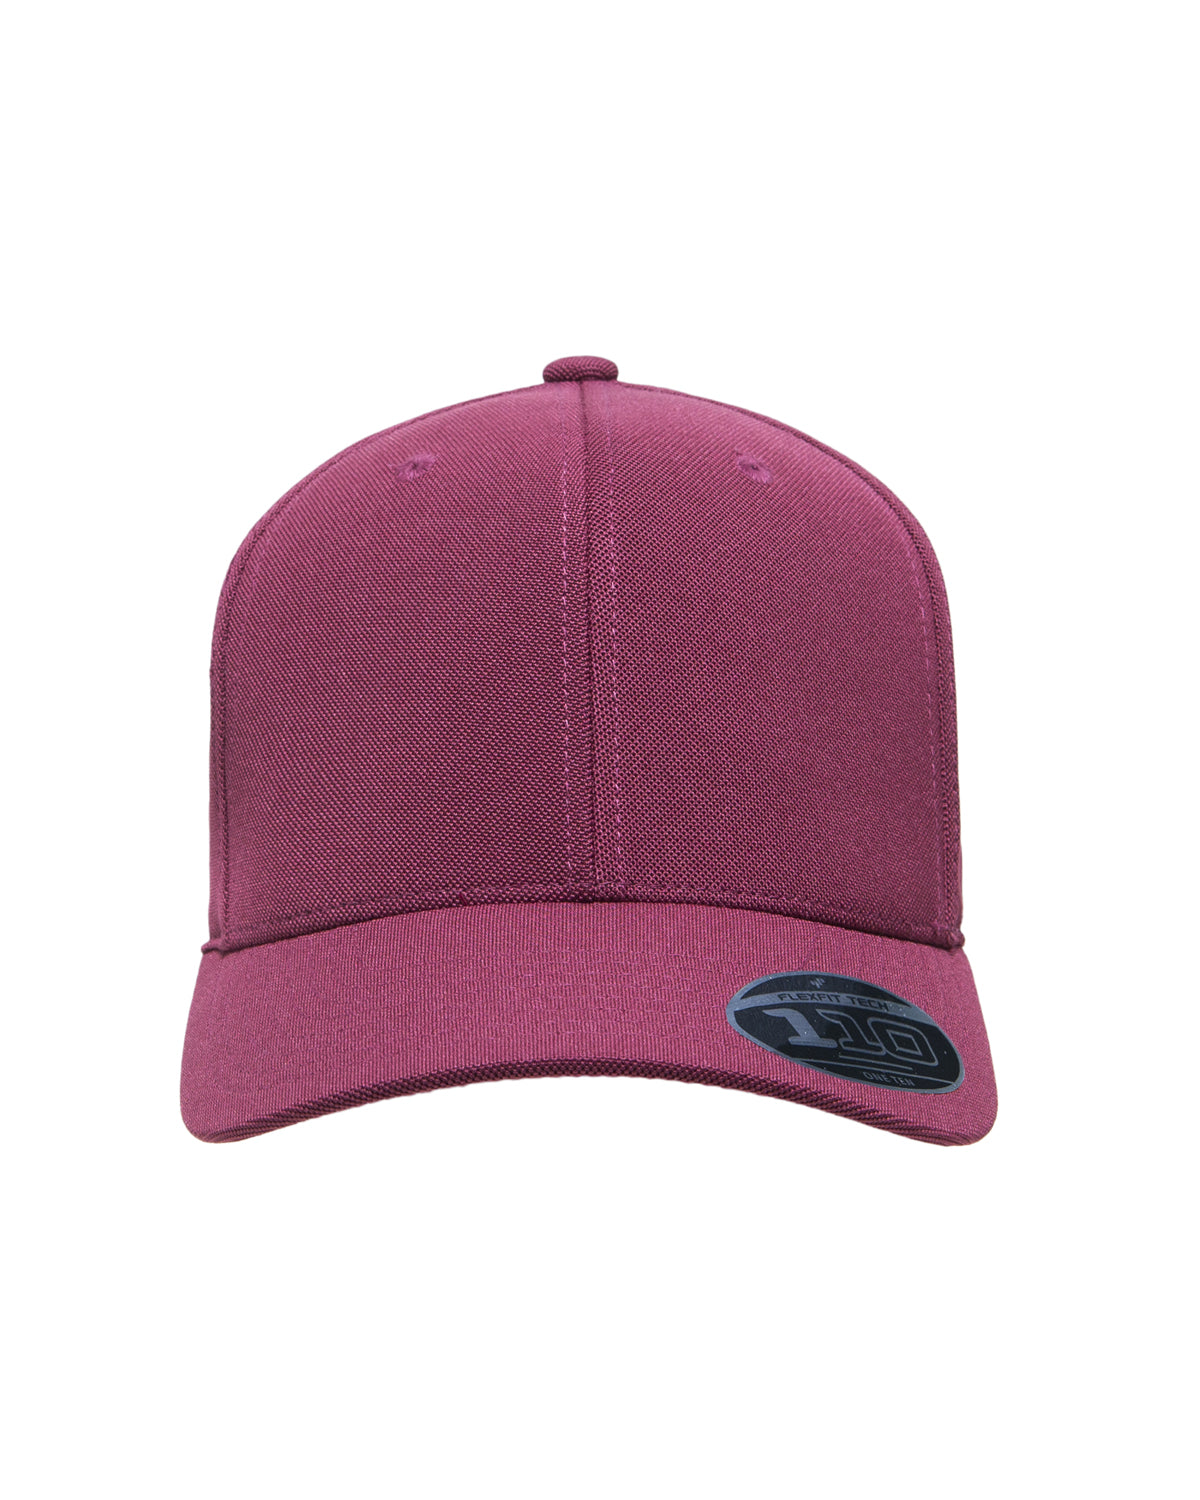 Team 365 ATB100 Mens Cool & Dry Moisture Wicking Adjustable Hat Maroon Front